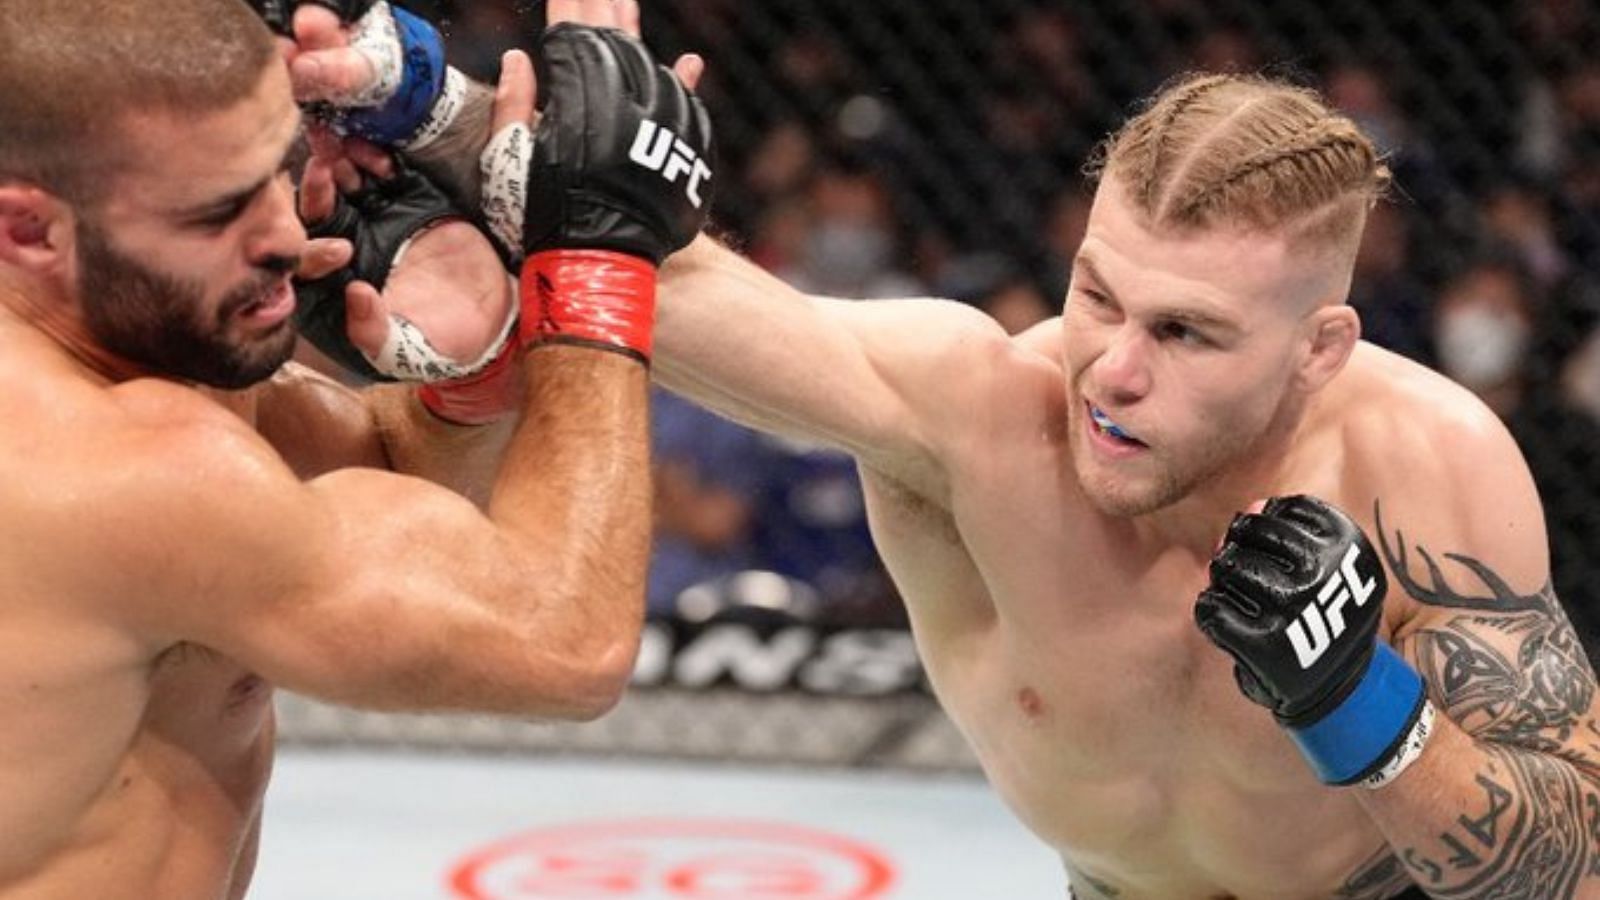 Jake Matthews looked hugely impressive in his victory over Andre Fialho